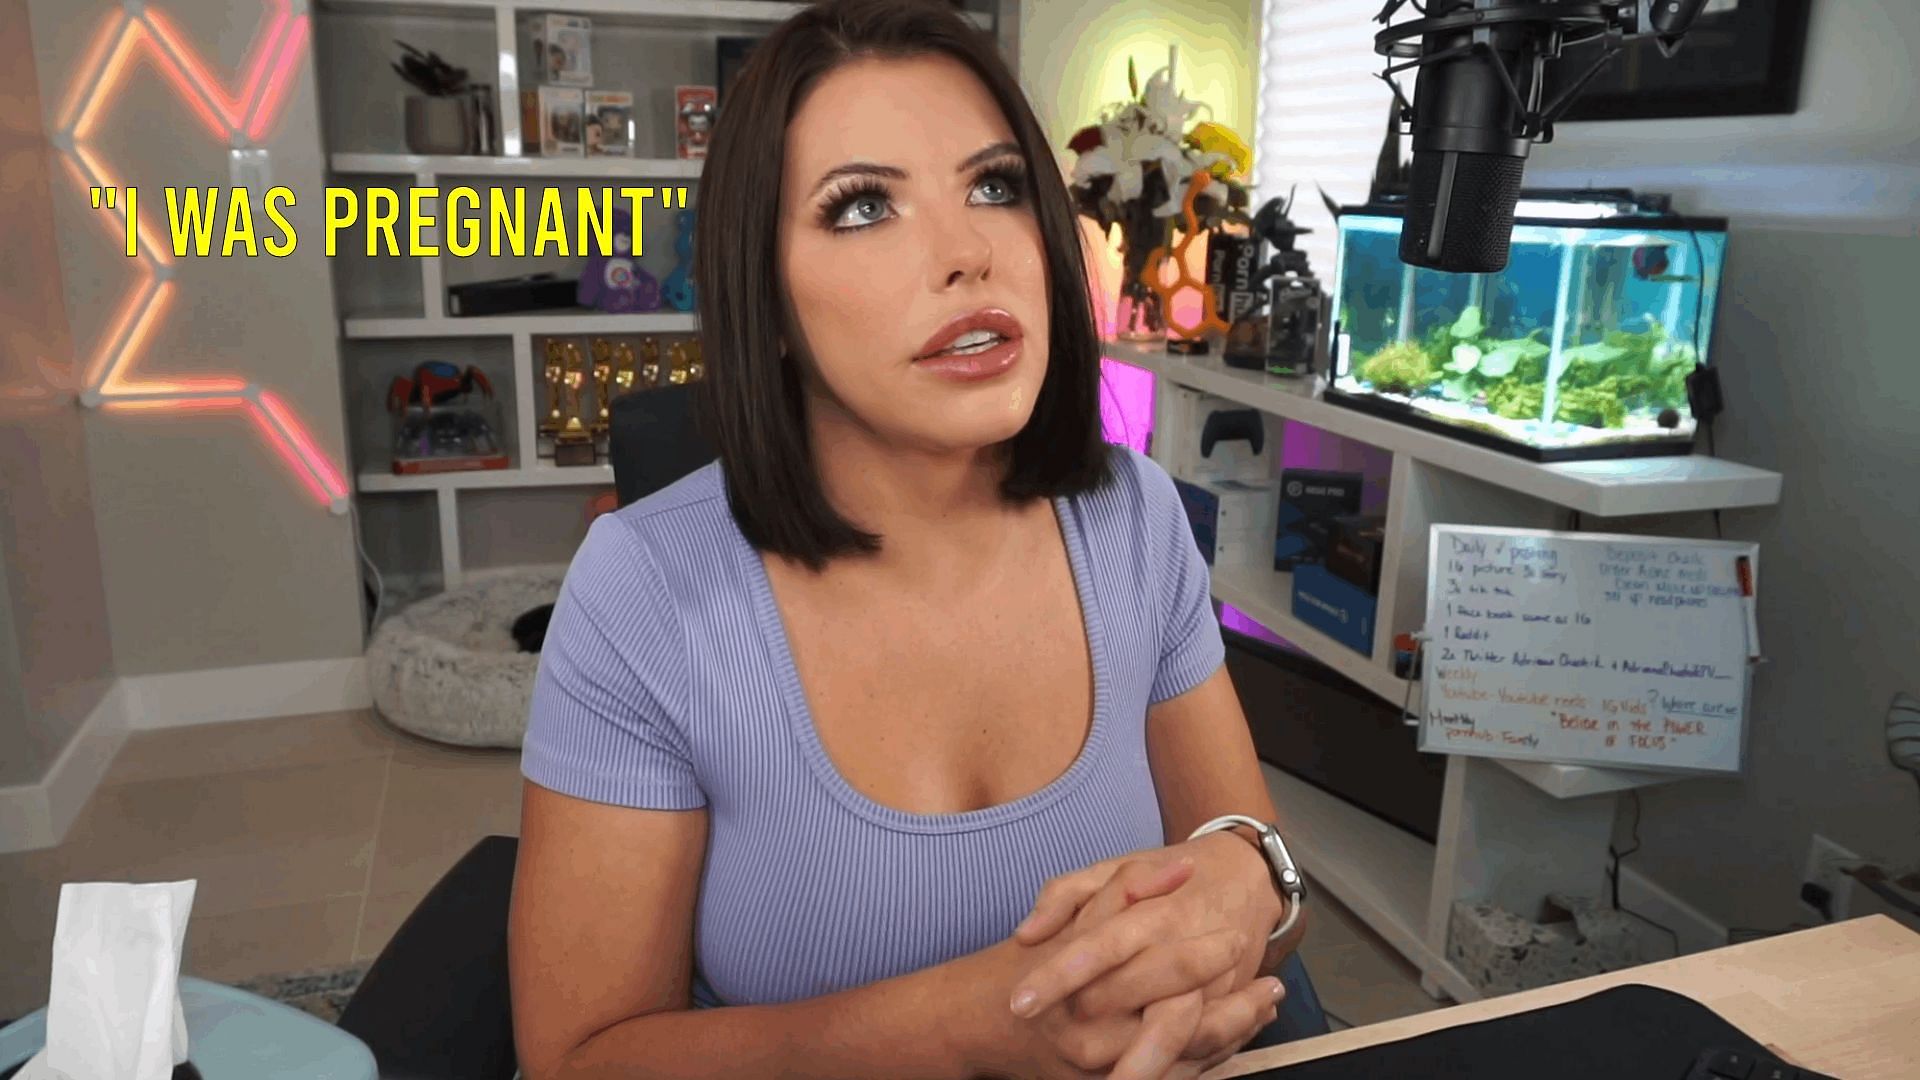 Adriana Chechik shares that she was pregnant during TwitchCon accident (Image via Sportskeeda)